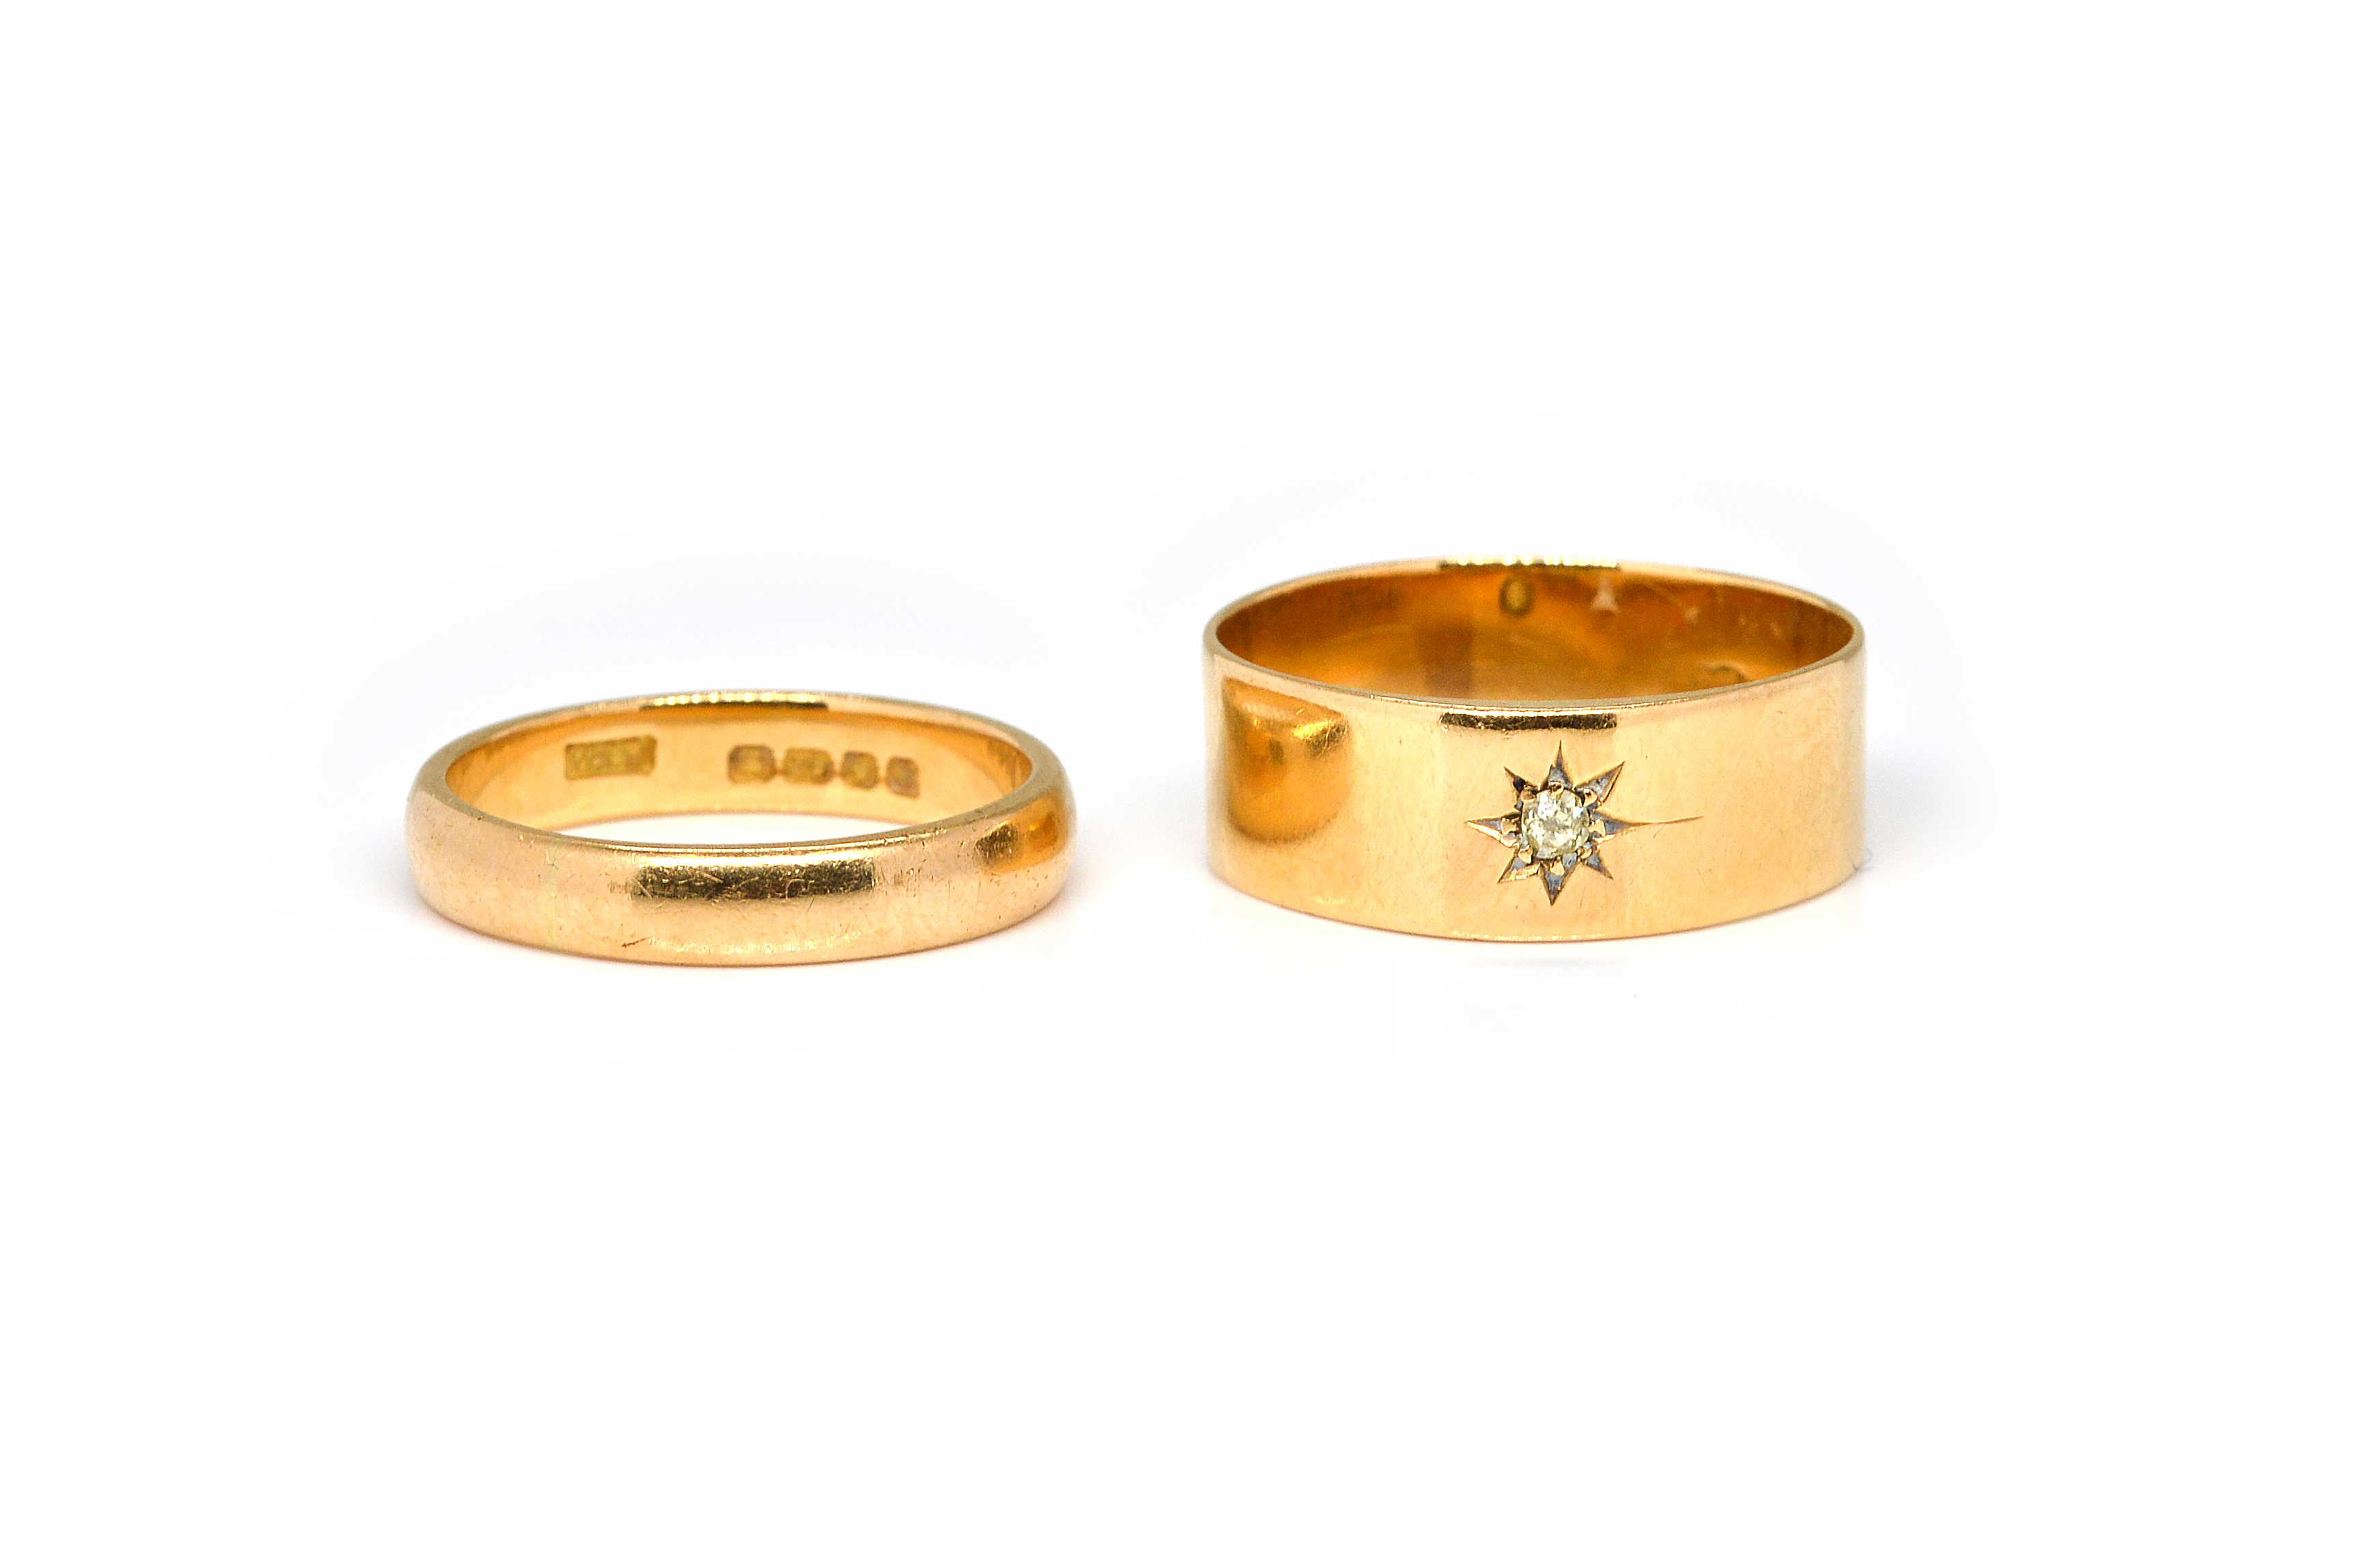 A DIAMOND GYPSY RING AND A GOLD 3ae653